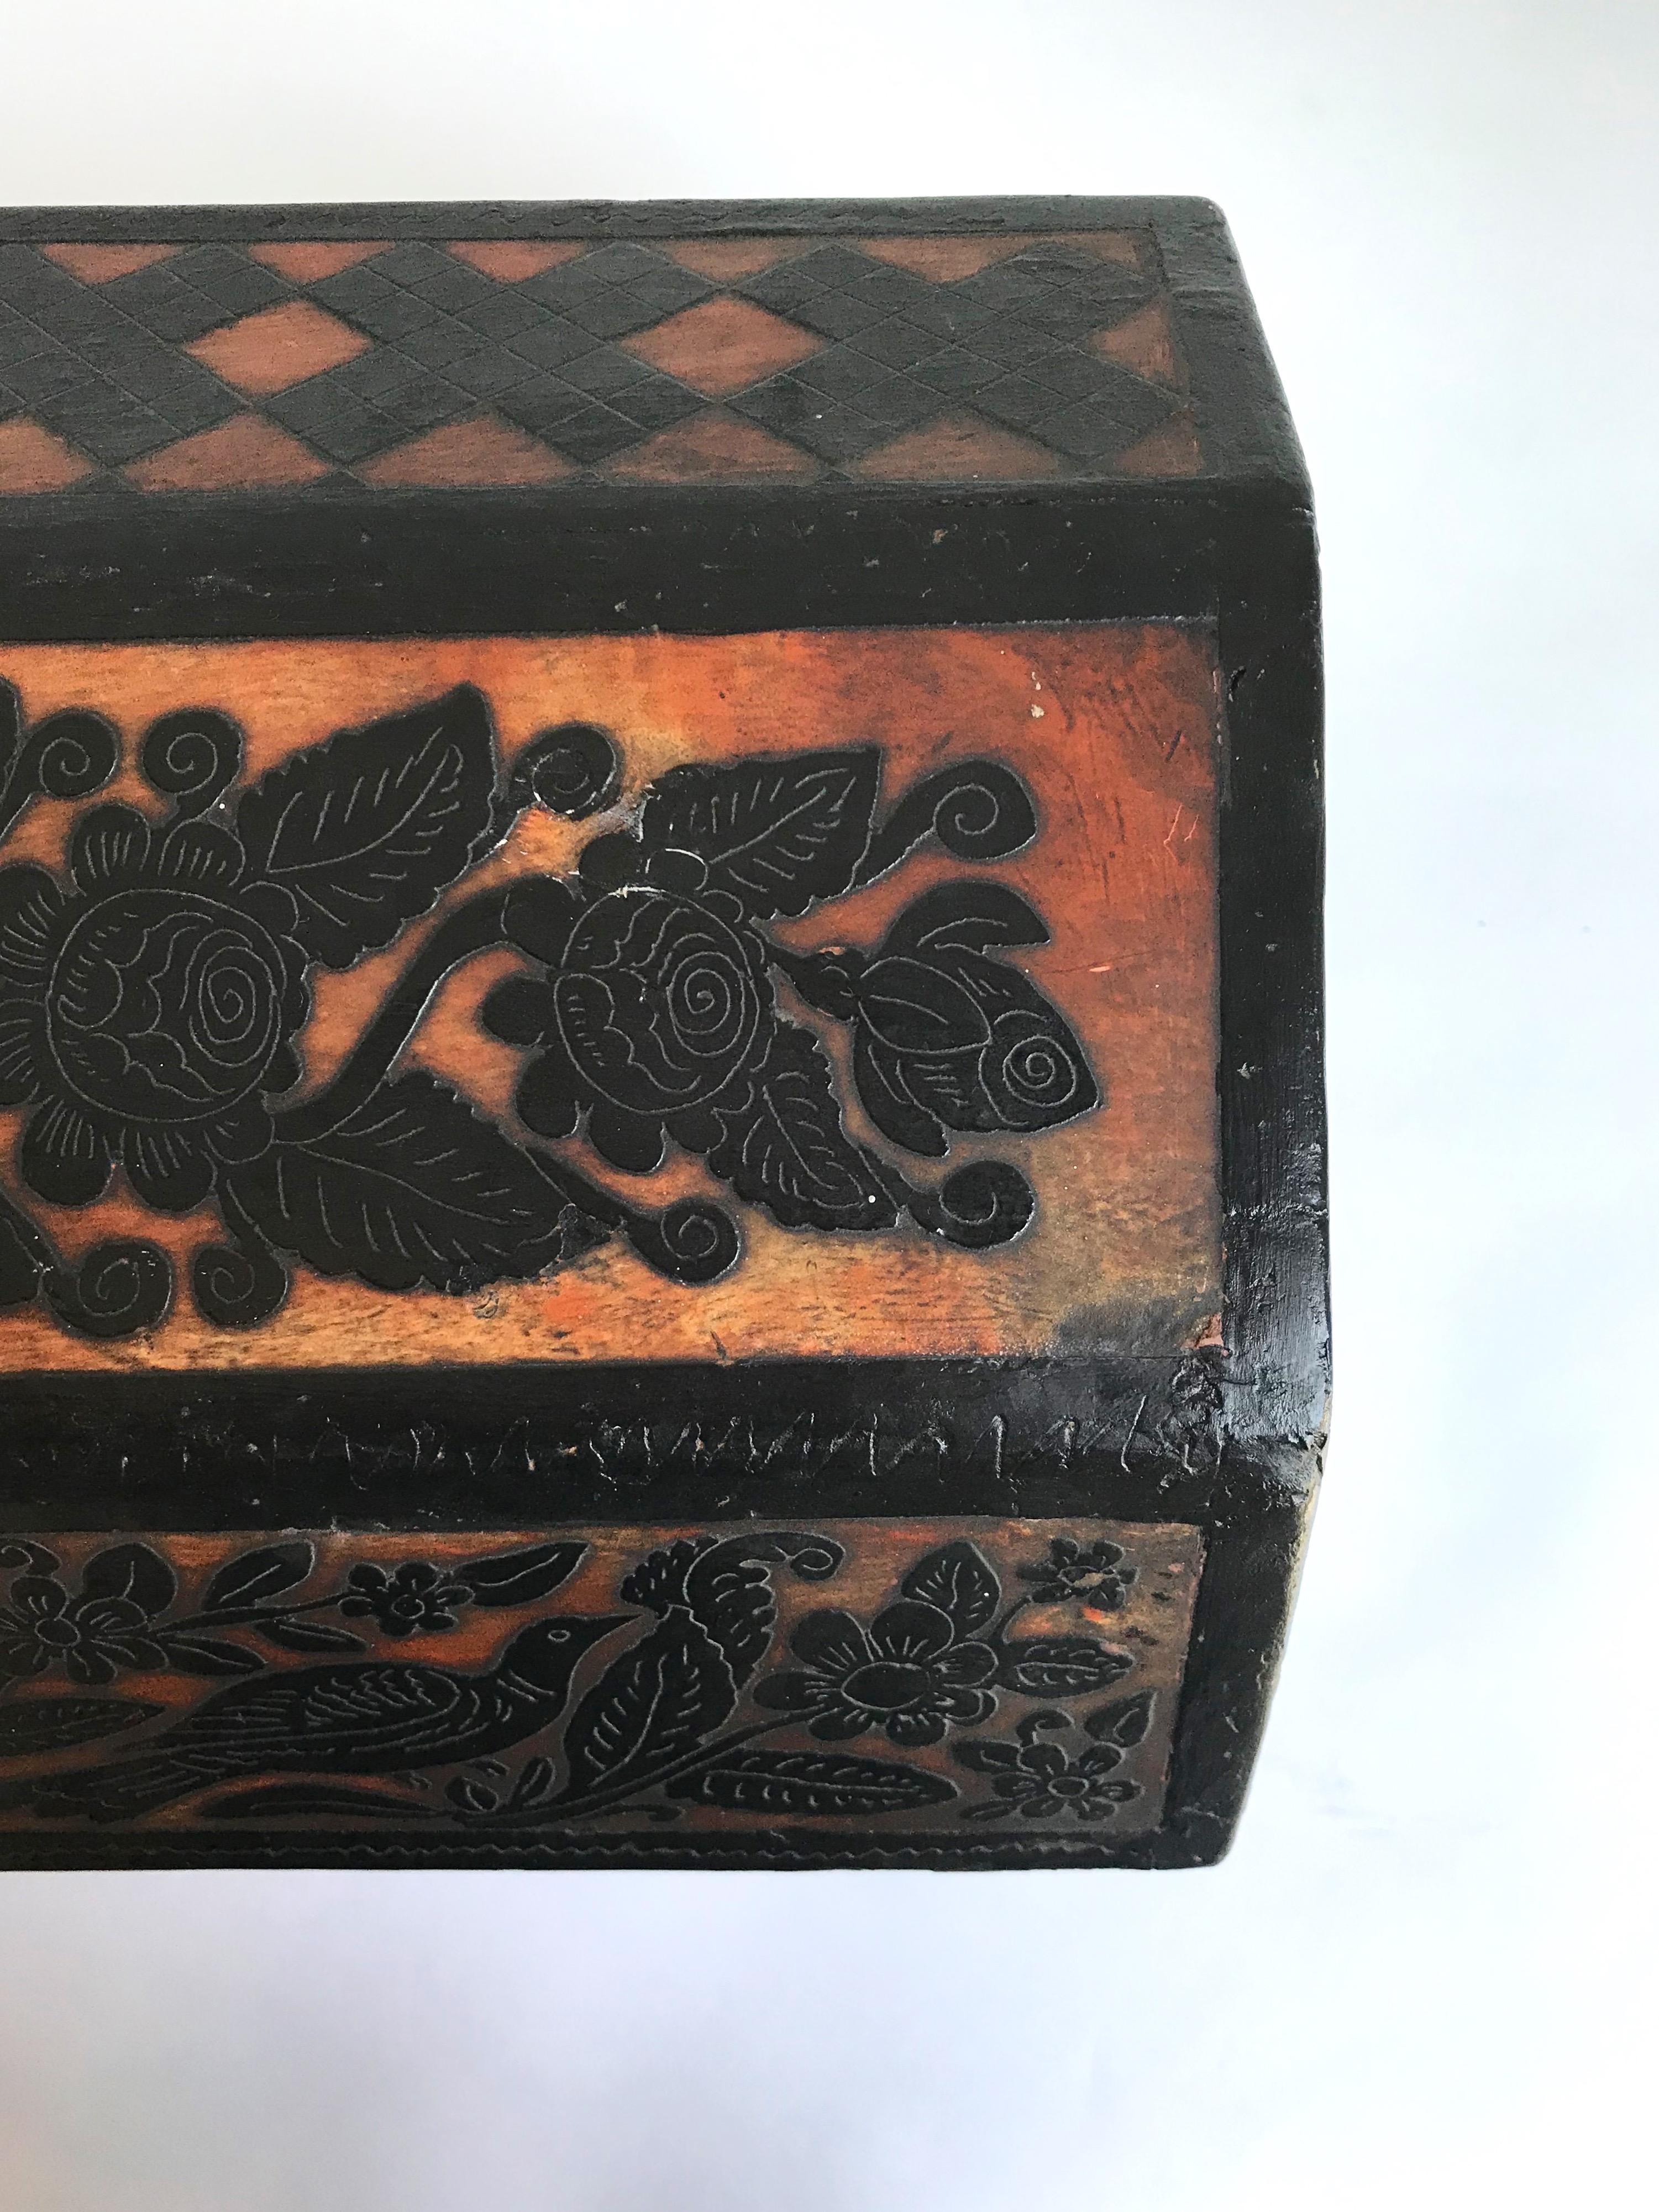 Early 19th Century American Carved Lacquered Folk Art Wooden Box from Tennessee 1